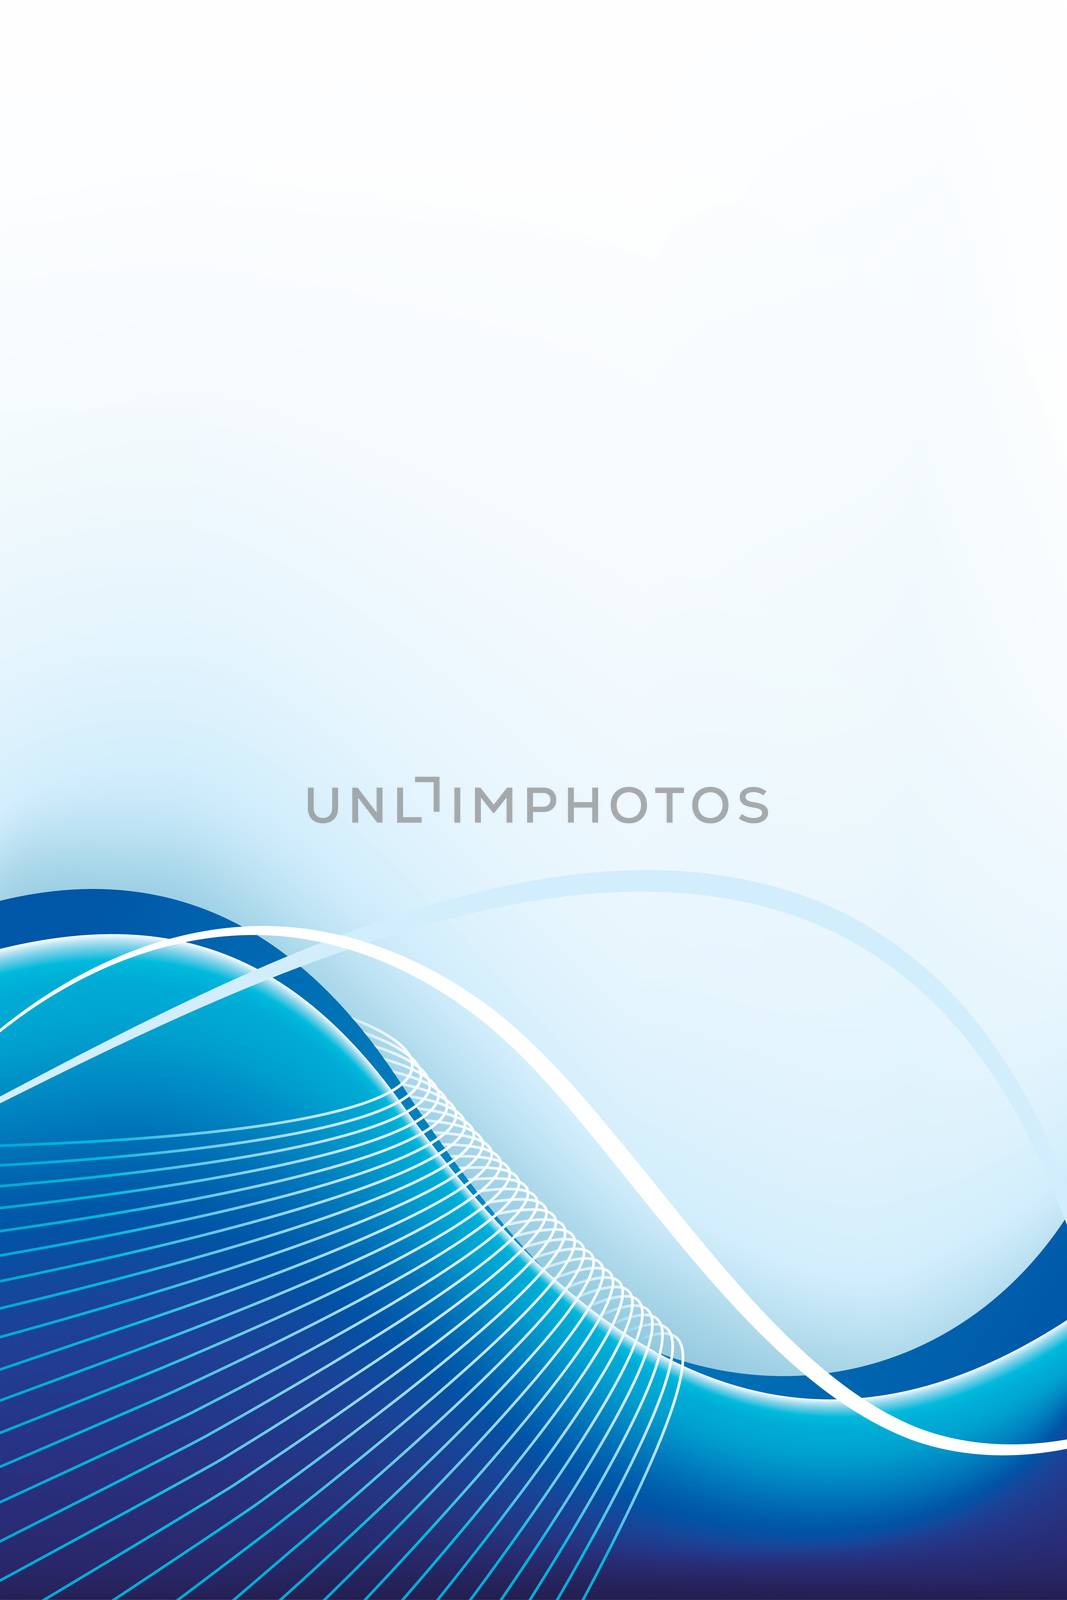 Abstract vector background in blue color for Your design